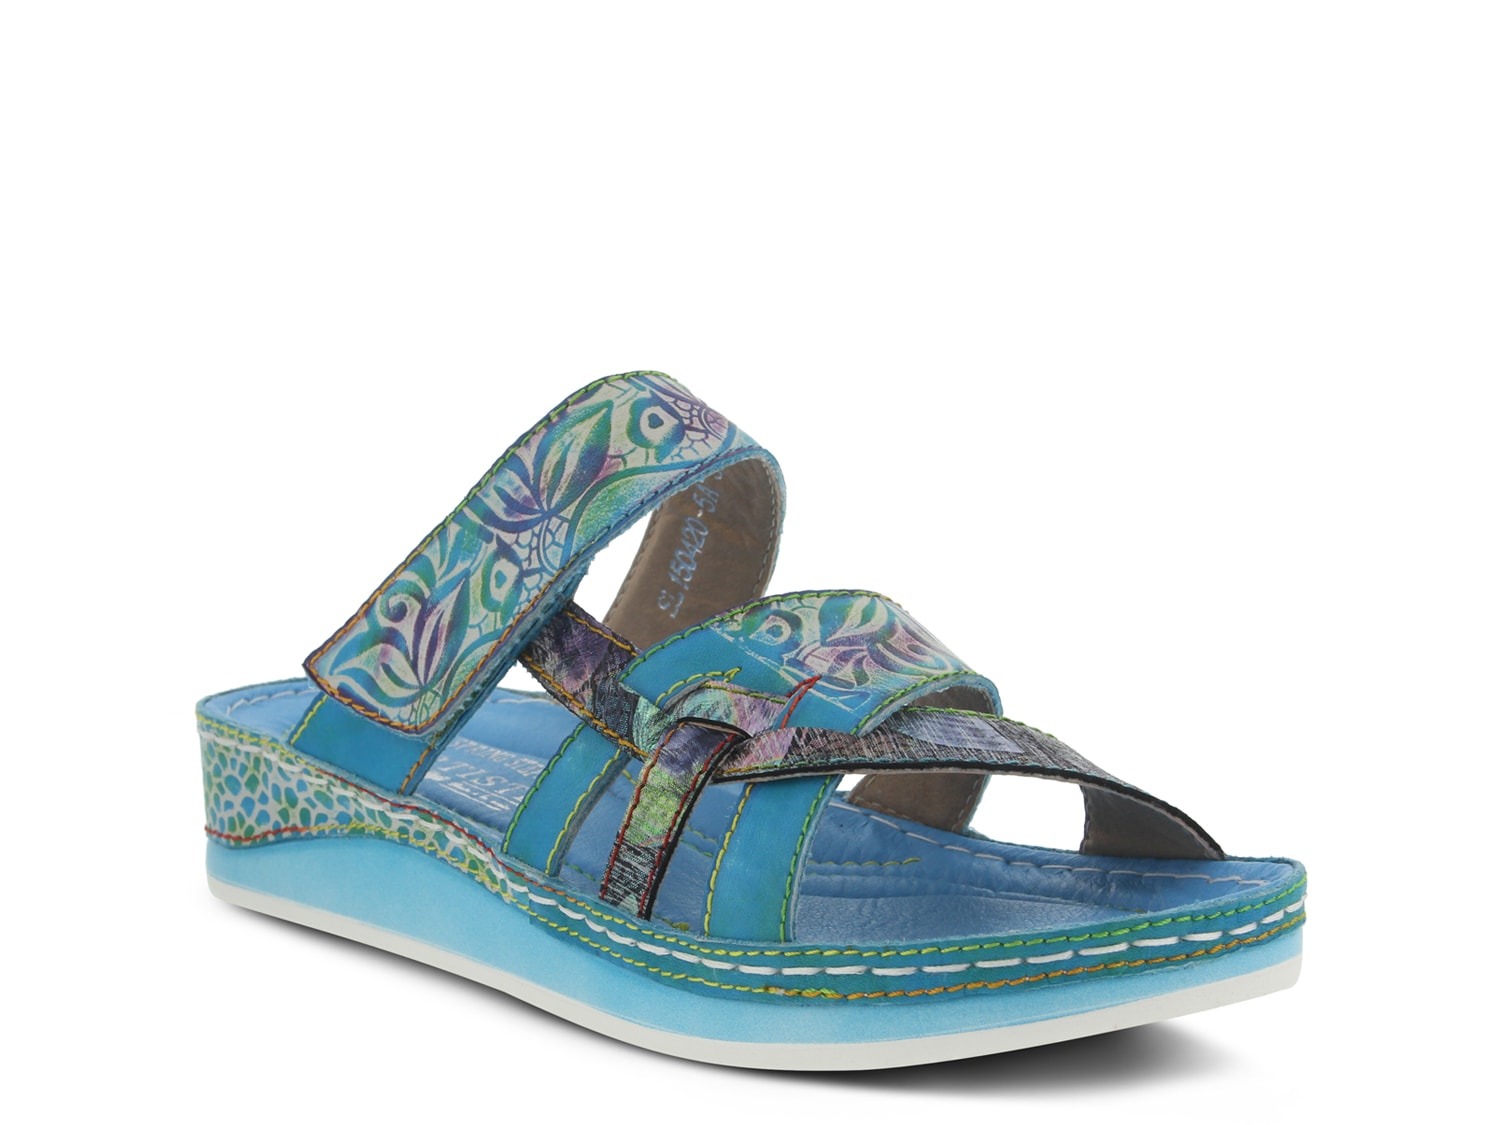 L'Artiste by Spring Step Caiman Wedge Sandal - Free Shipping | DSW